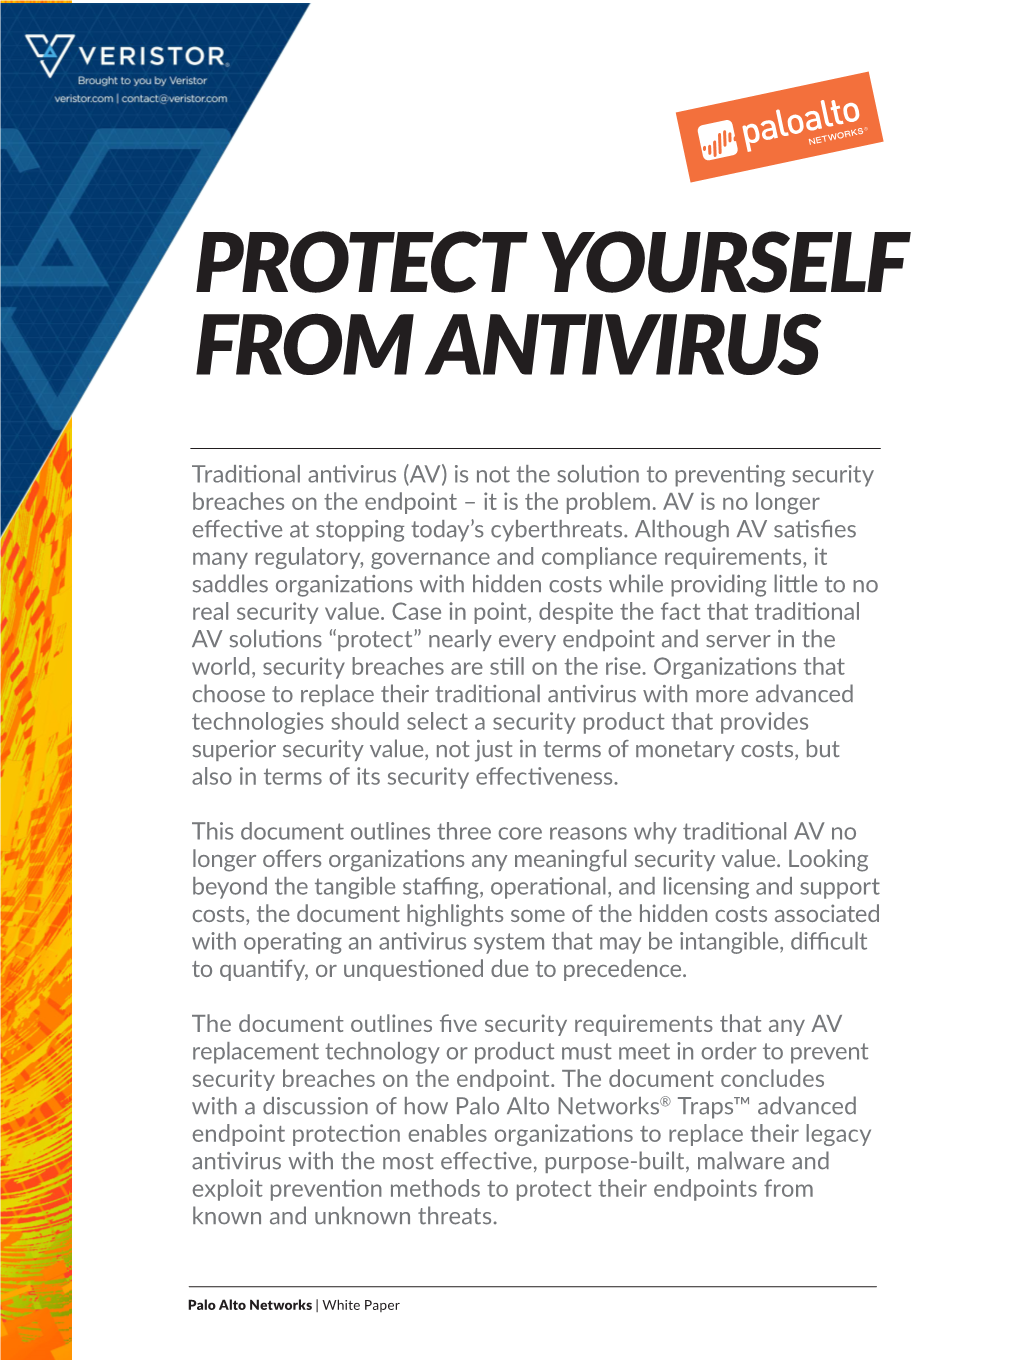 Protect Yourself from Antivirus